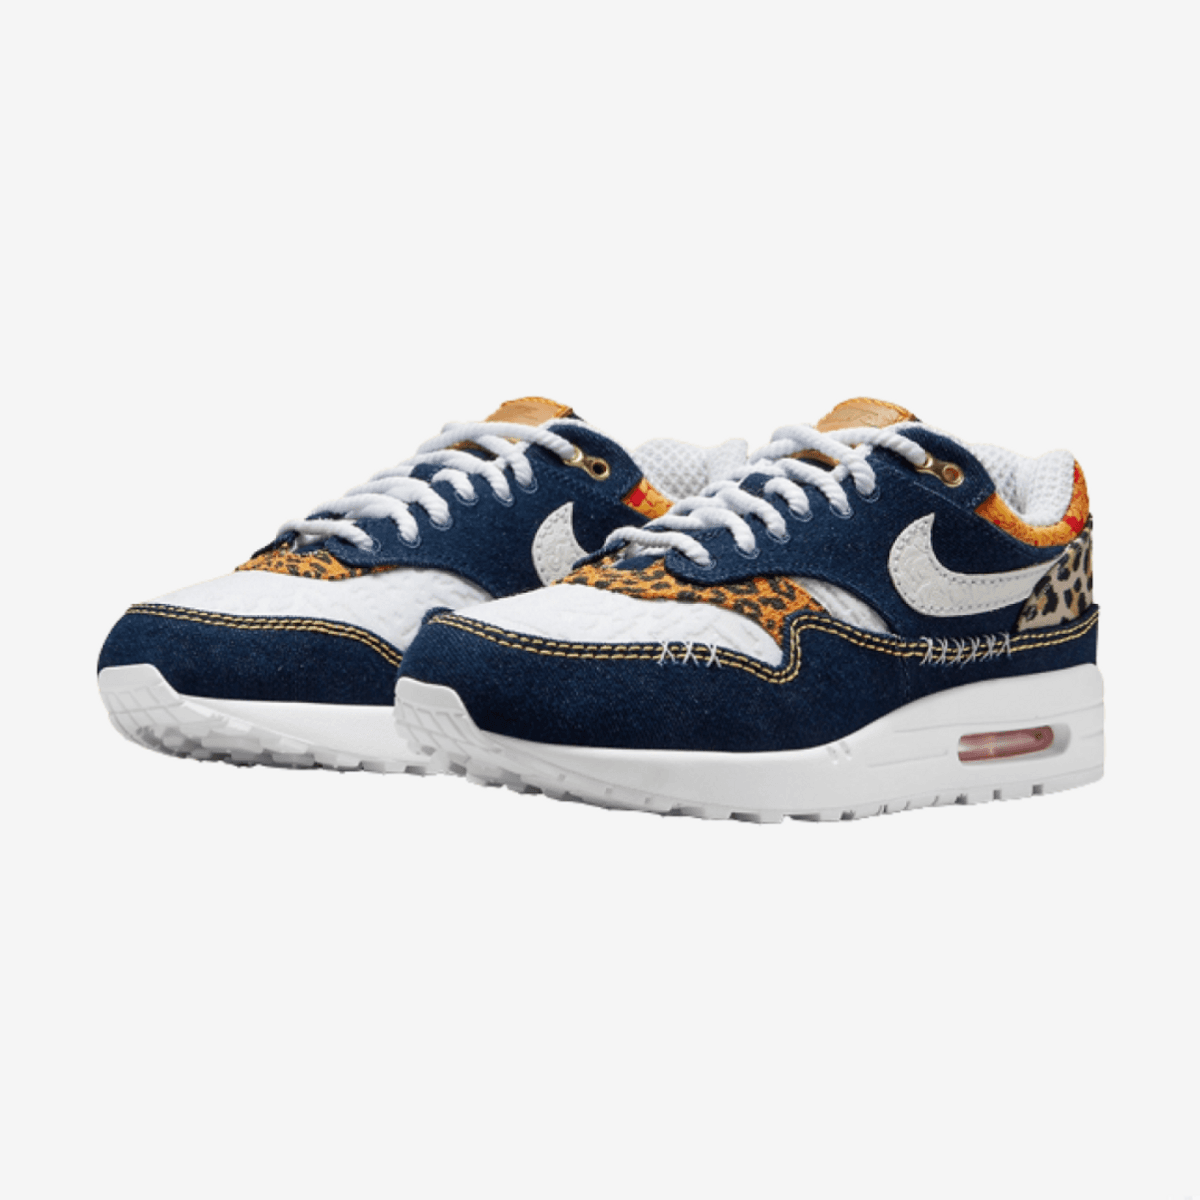 A Mash Up Of Different Materials Take Over The Nike Air Max 1 Denim Leopard